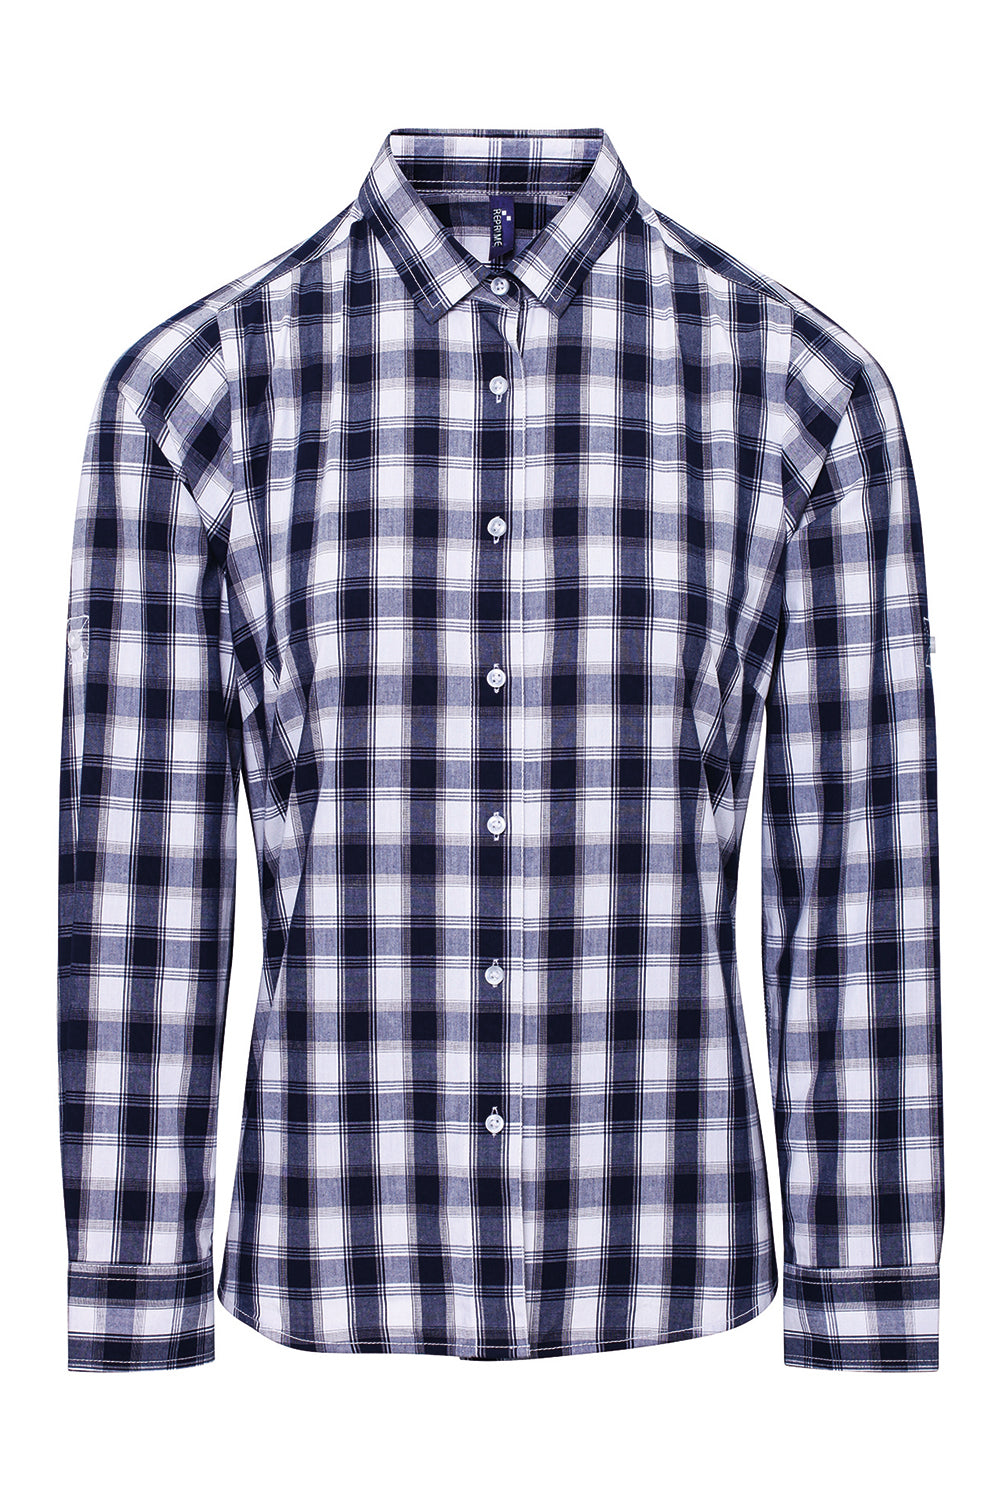 Artisan Collection RP350 Womens Mulligan Check Long Sleeve Button Down Shirt White/Navy Blue Model Flat Front